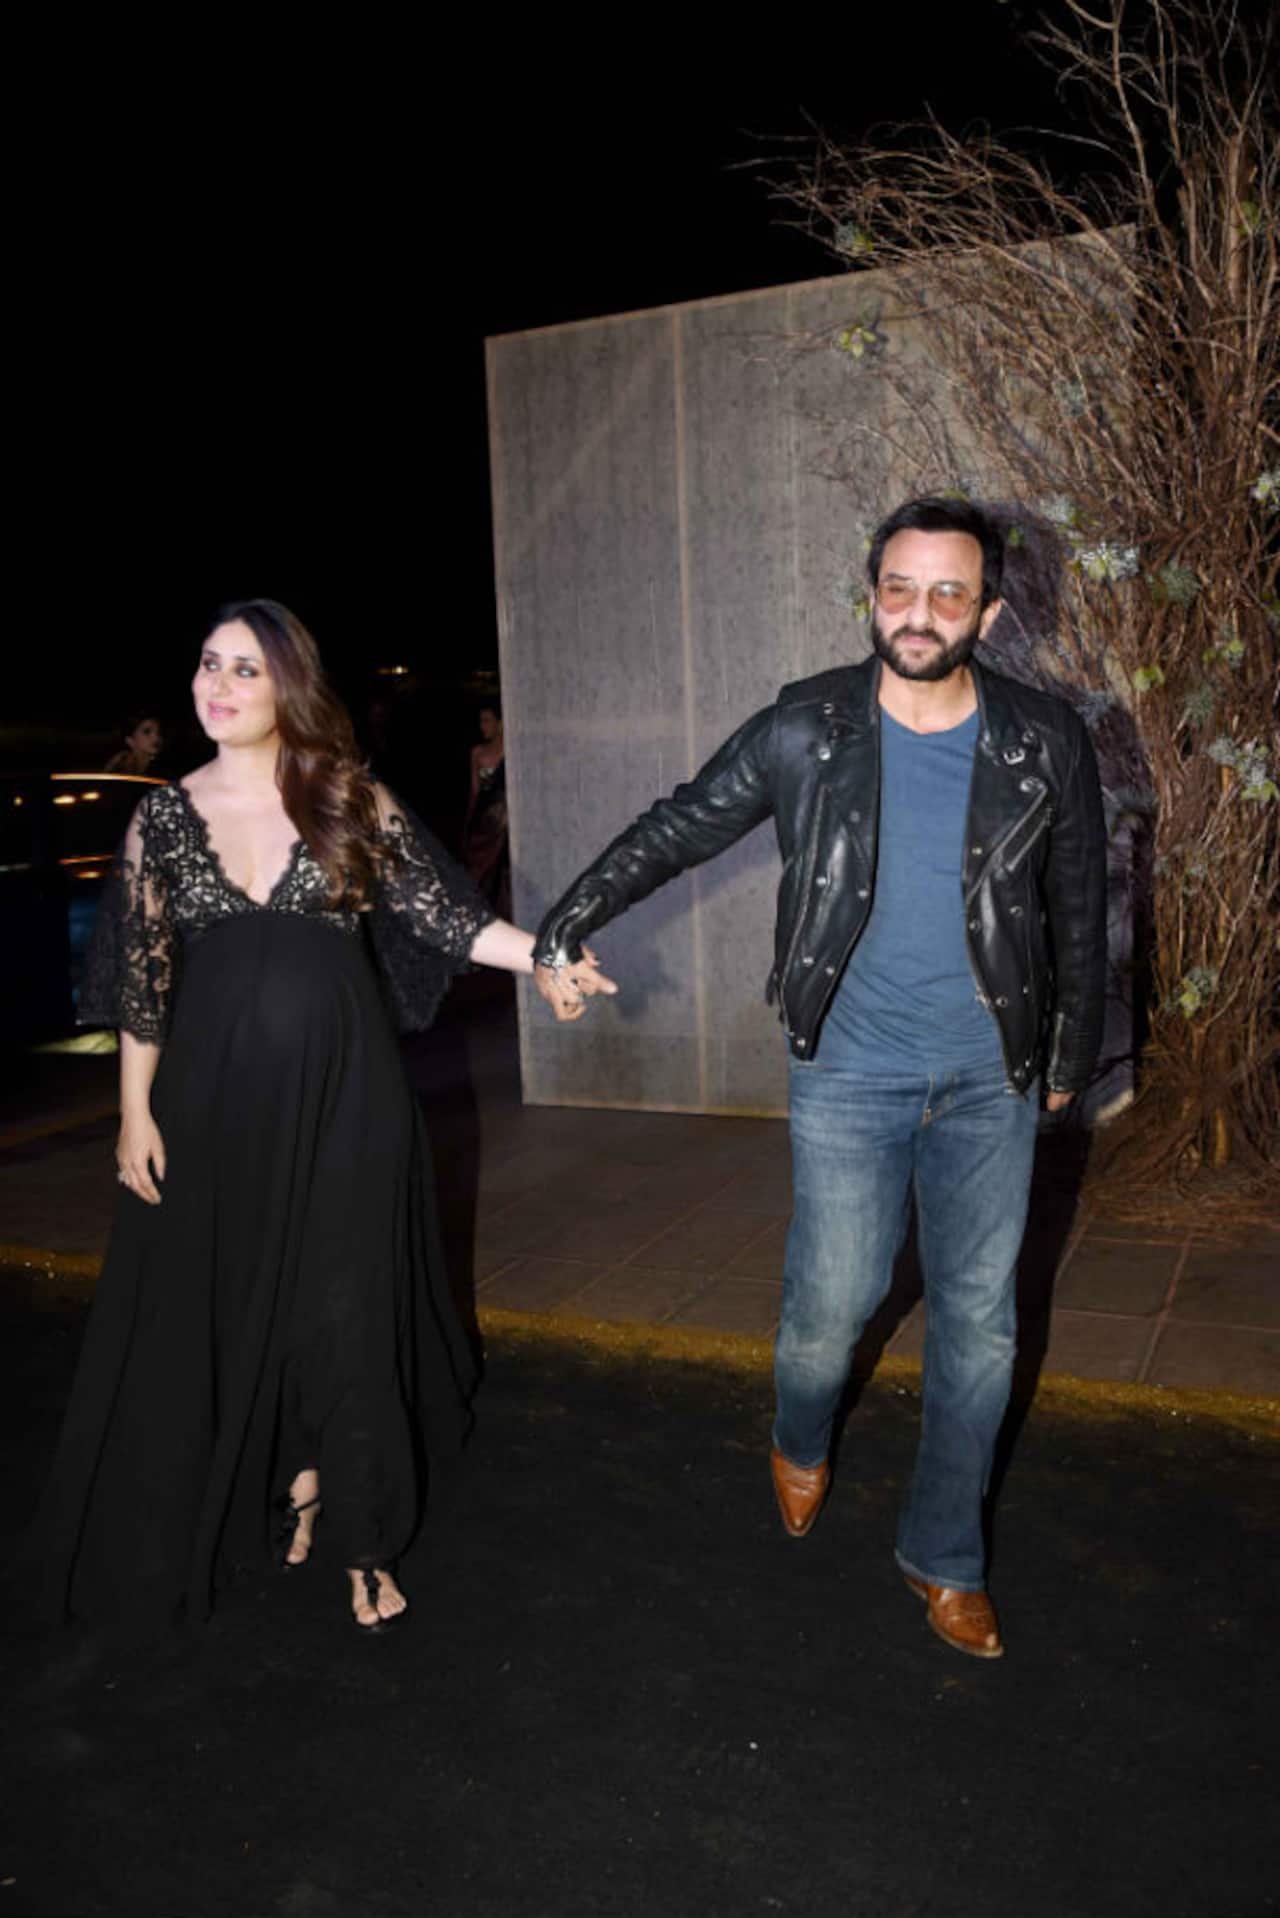 Kareena Kapoor Khan drags a reluctant Saif to pose for the shutterbugs - watch video